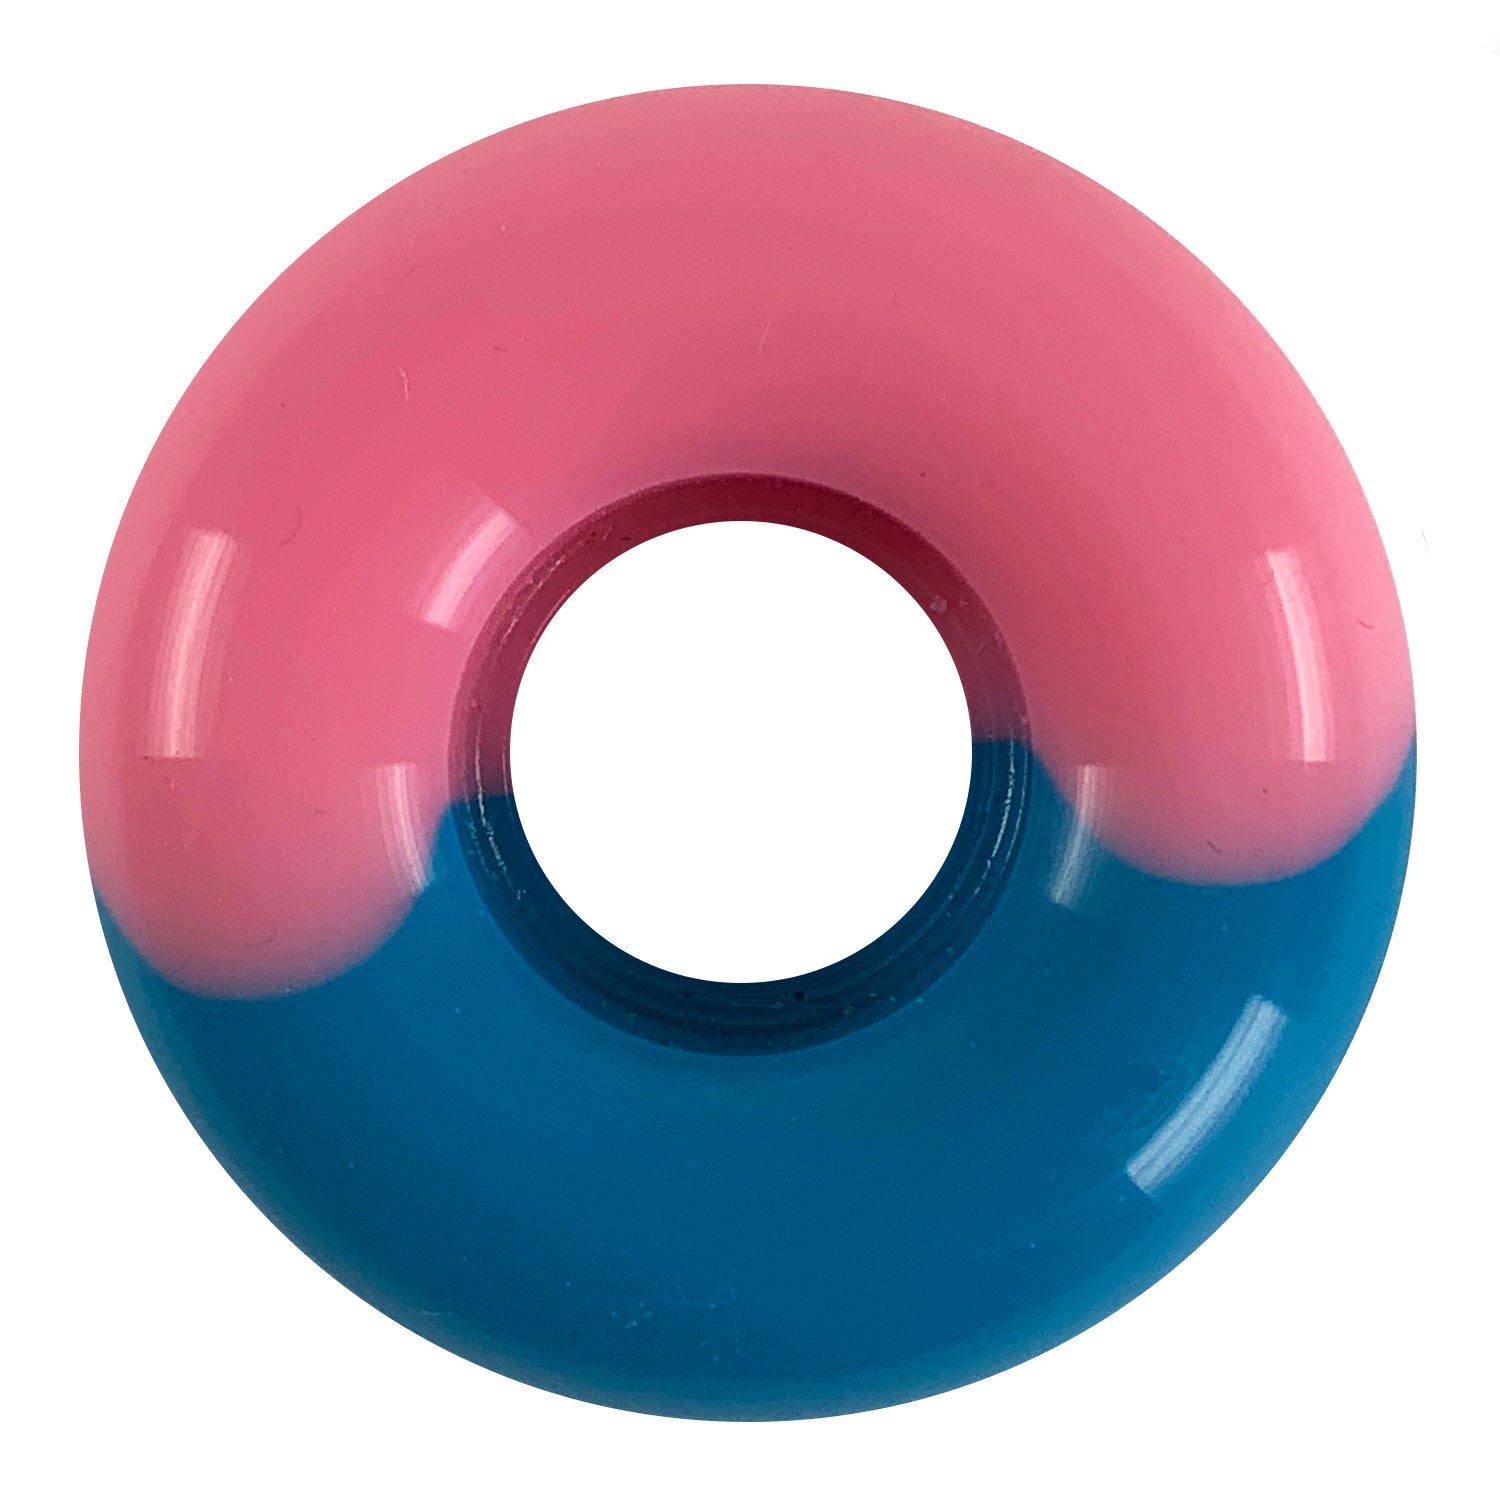 Orbs - 52mm - 99a - Apparitions Splits - Pink/Blue - Prime Delux Store